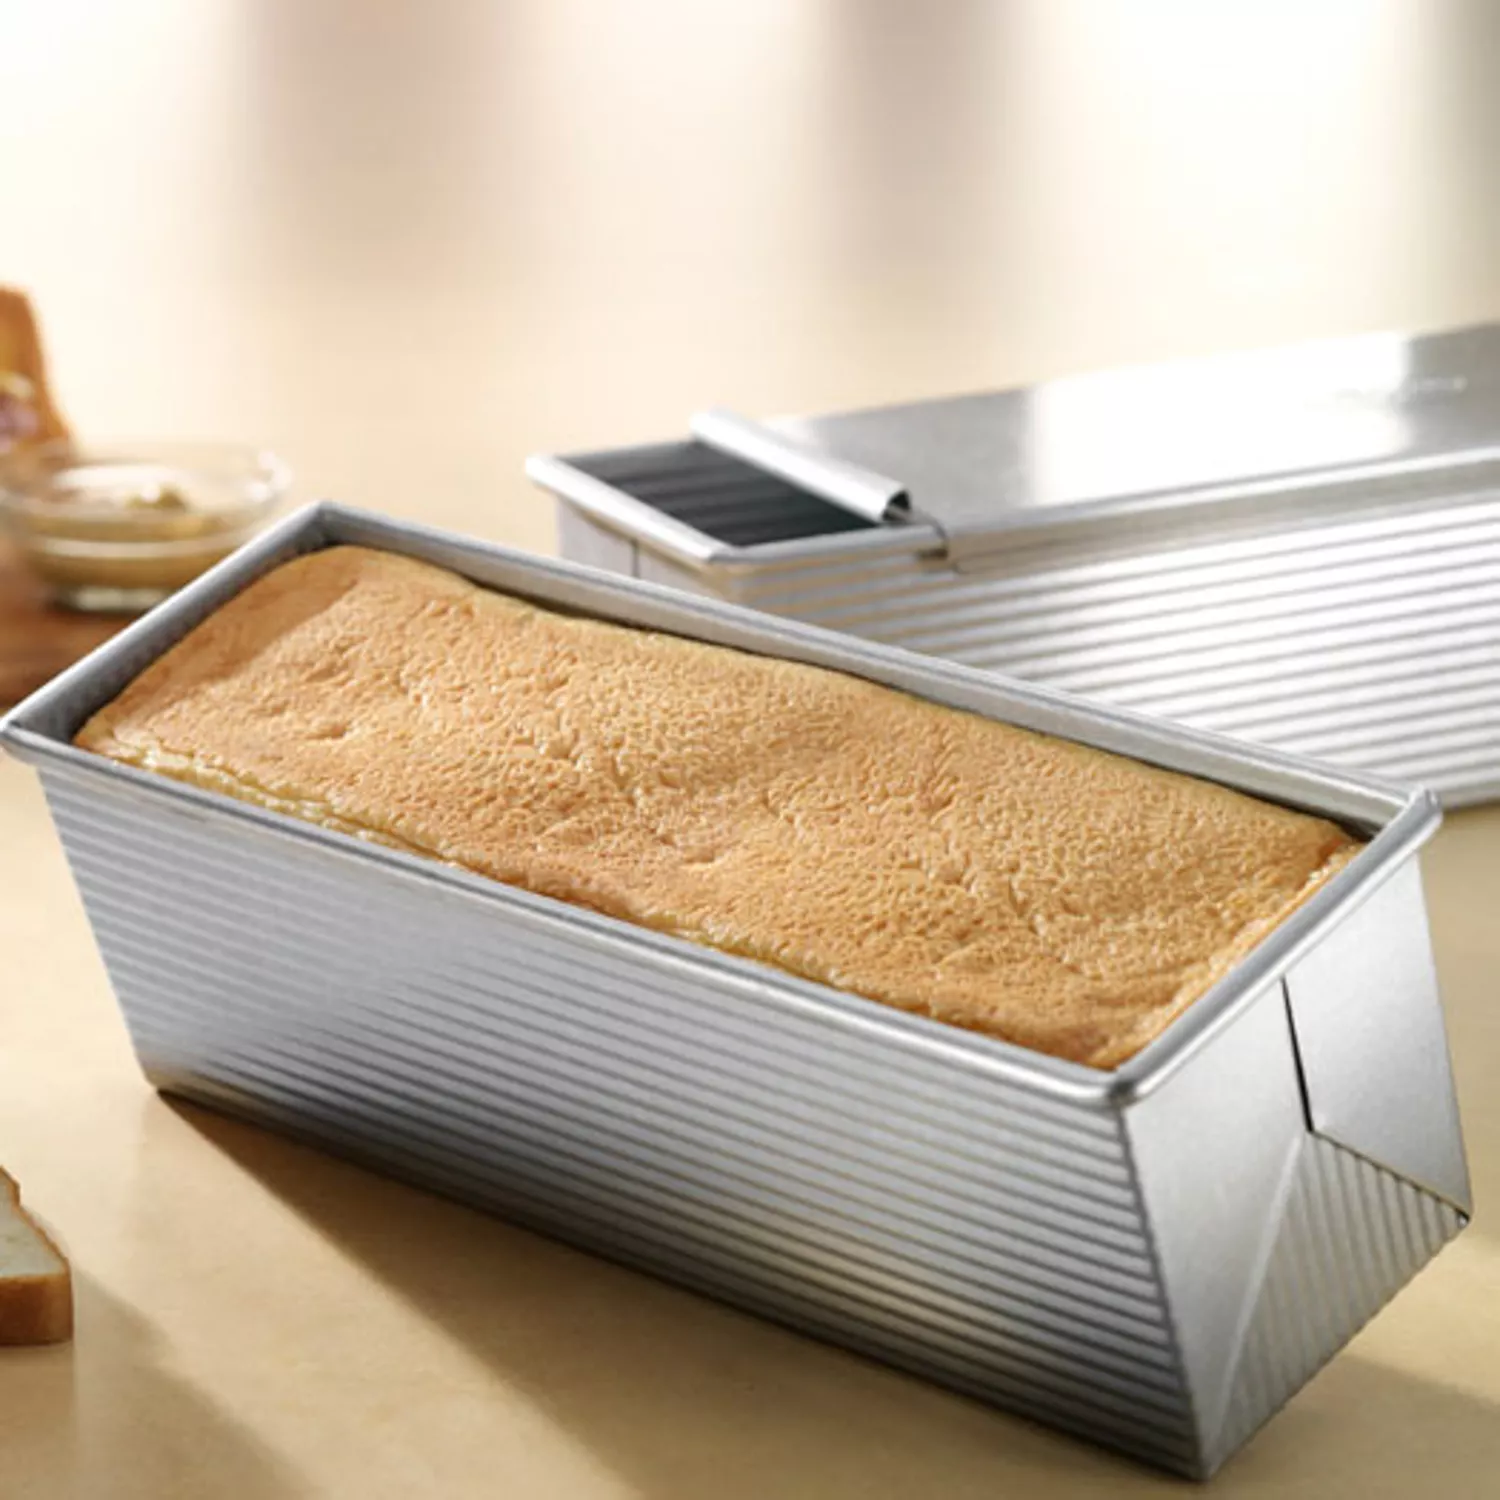 USA Pan Bakeware Pullman Loaf Pan with Cover 13 x 4 in